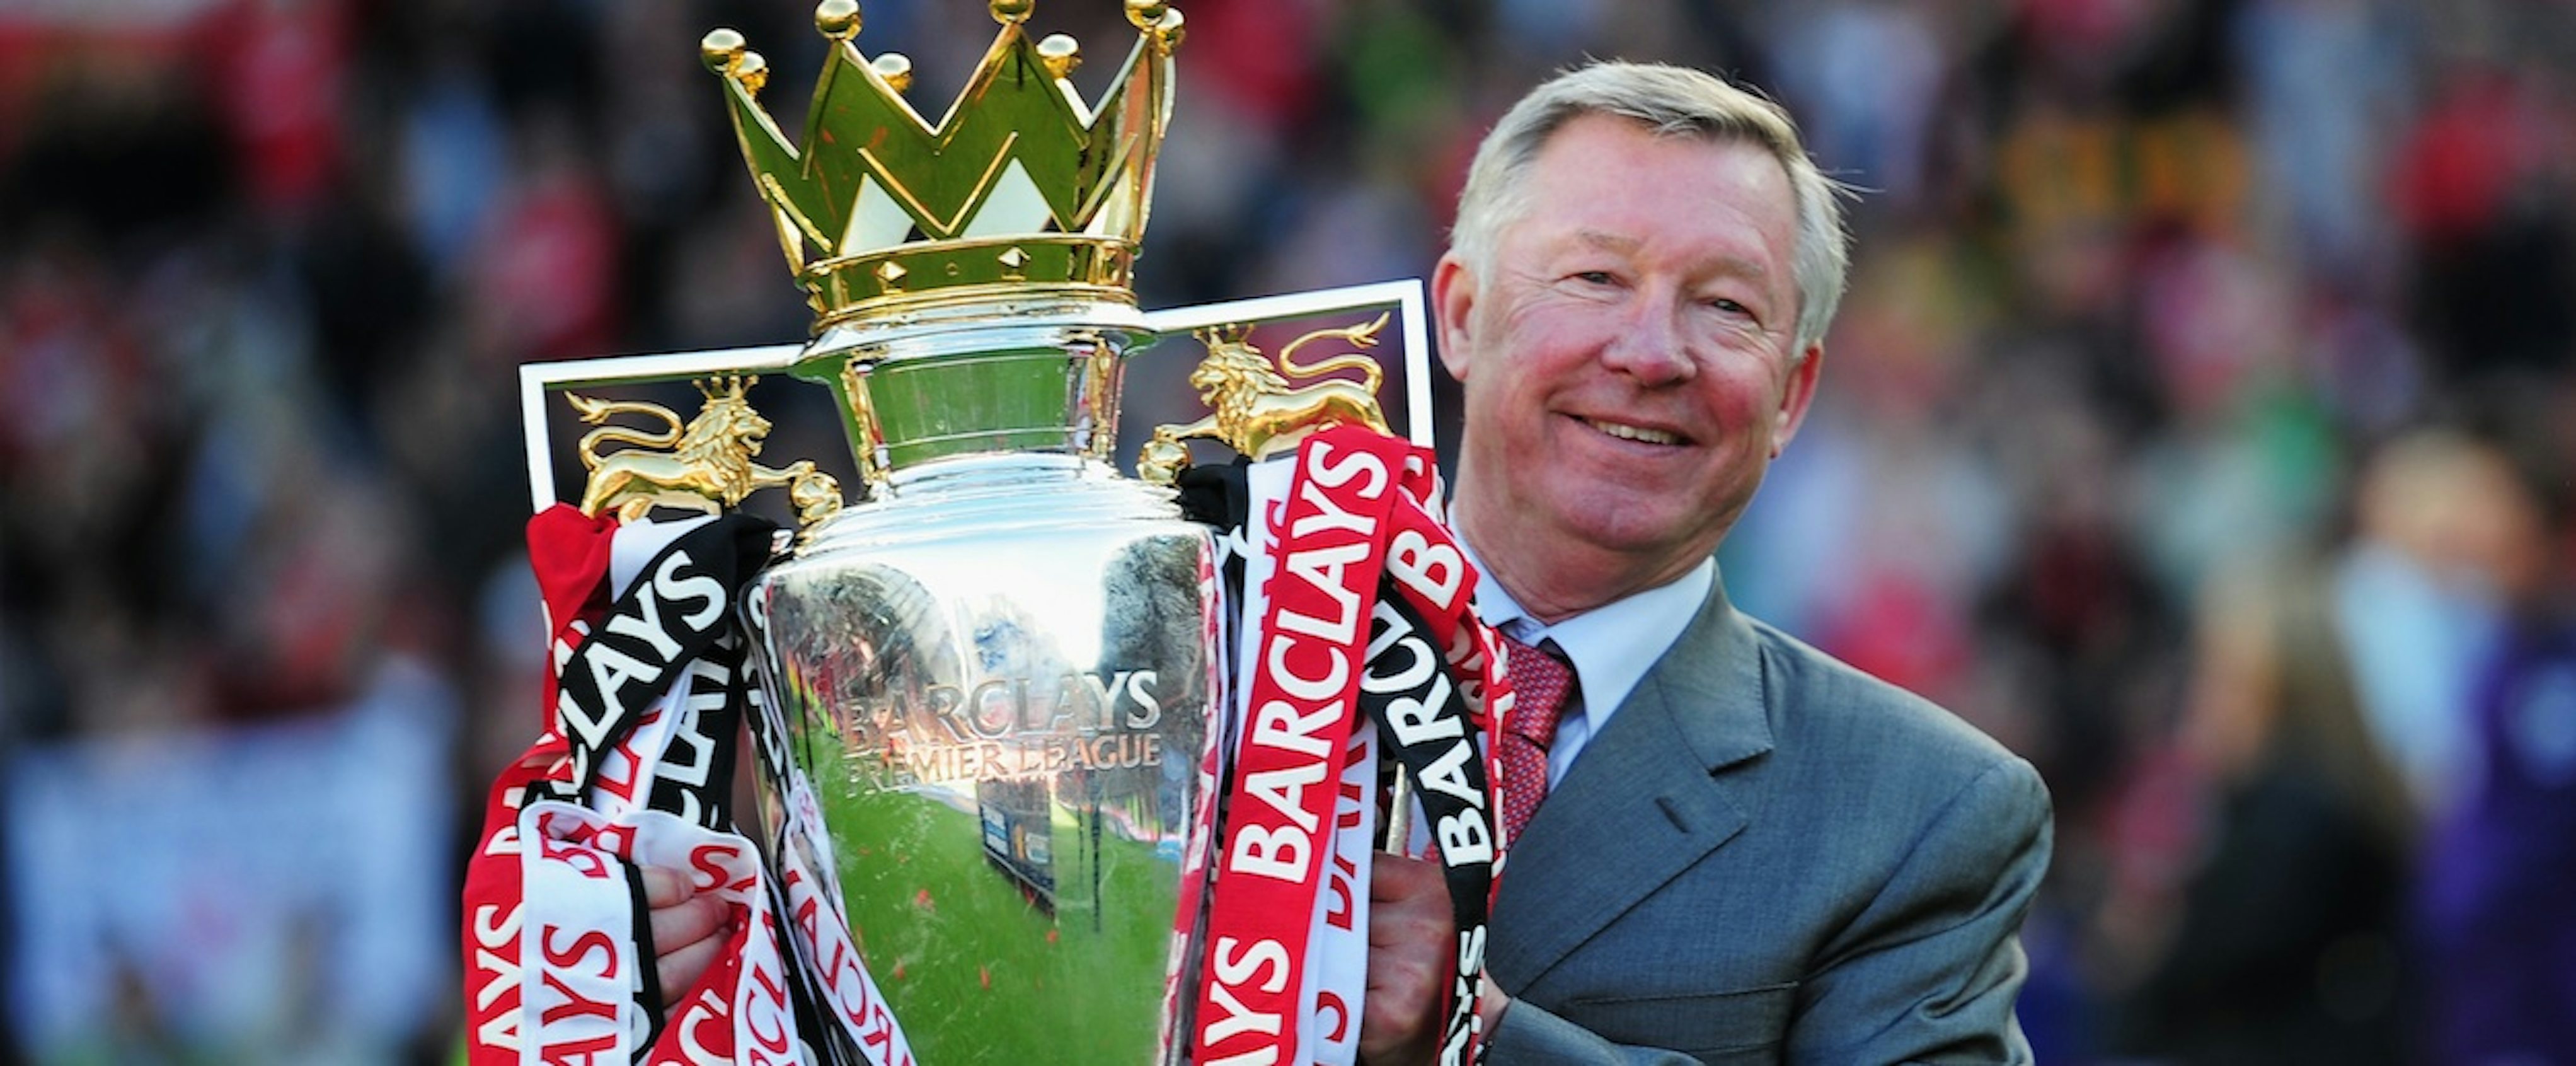 Alex Ferguson Retires from Manchester United, But His Legacy Continues ...